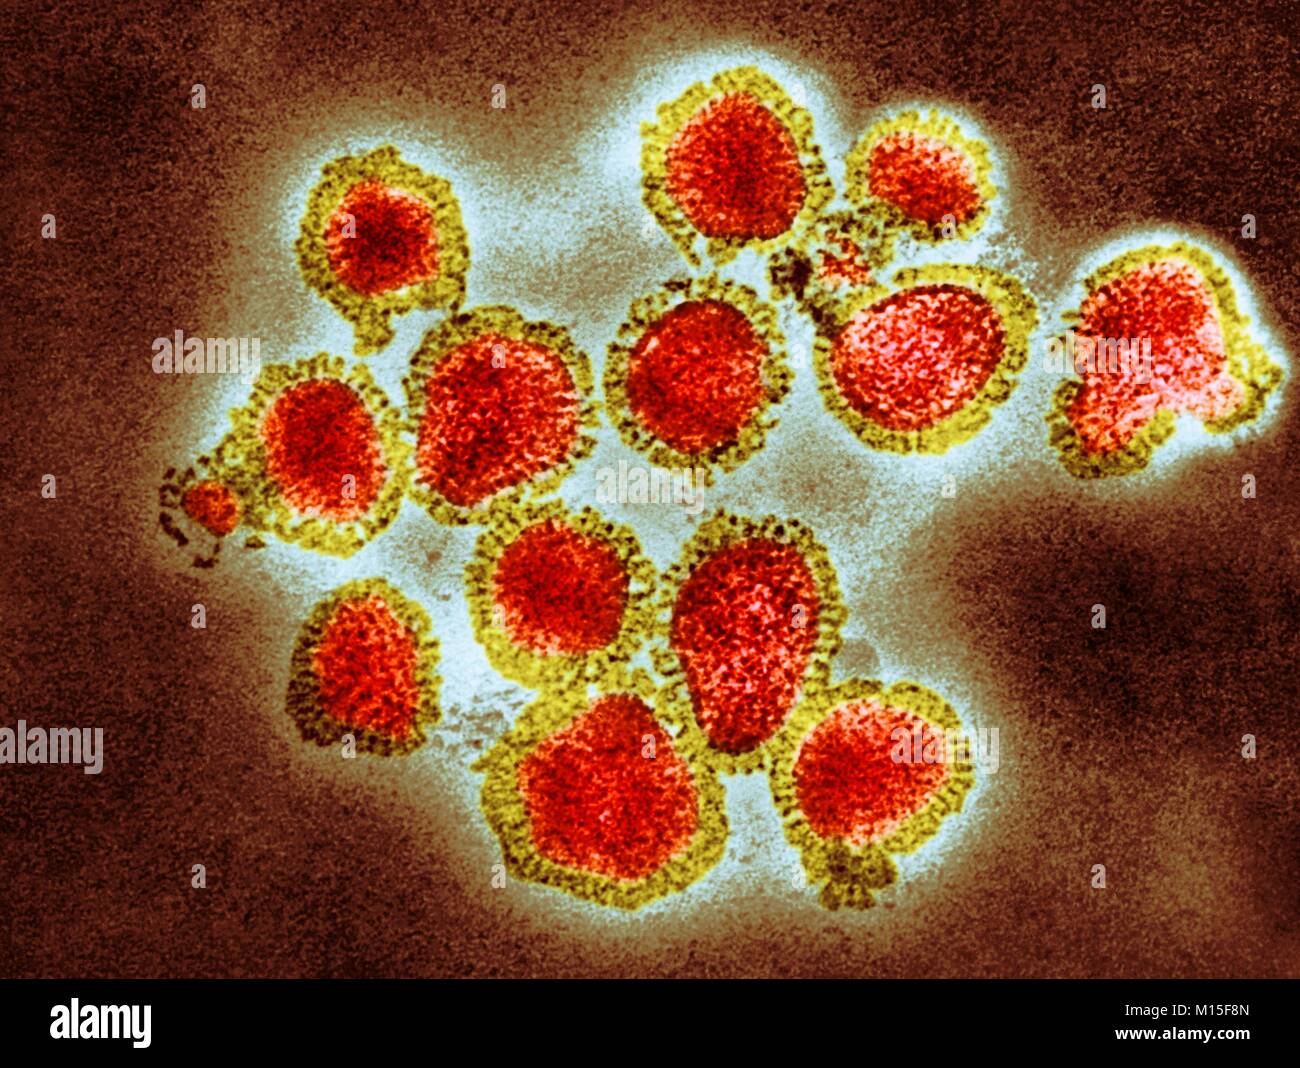 H3N2 influenza virus particles, coloured transmission electron micrograph (TEM). Each virus consists of a nucleocapsid (protein coat) that surrounds a core of RNA (ribonucleic acid) genetic material. Surrounding the nucleocapsid is a lipid envelope that contains the glycoprotein spikes haemagglutinin (H) and neuraminidase (N). These viruses were part of the Hong Kong Flu pandemic of 1968-1969 that killed approximately one million worldwide. H3N2 viruses are able to infect birds and mammals as well as humans. Stock Photo